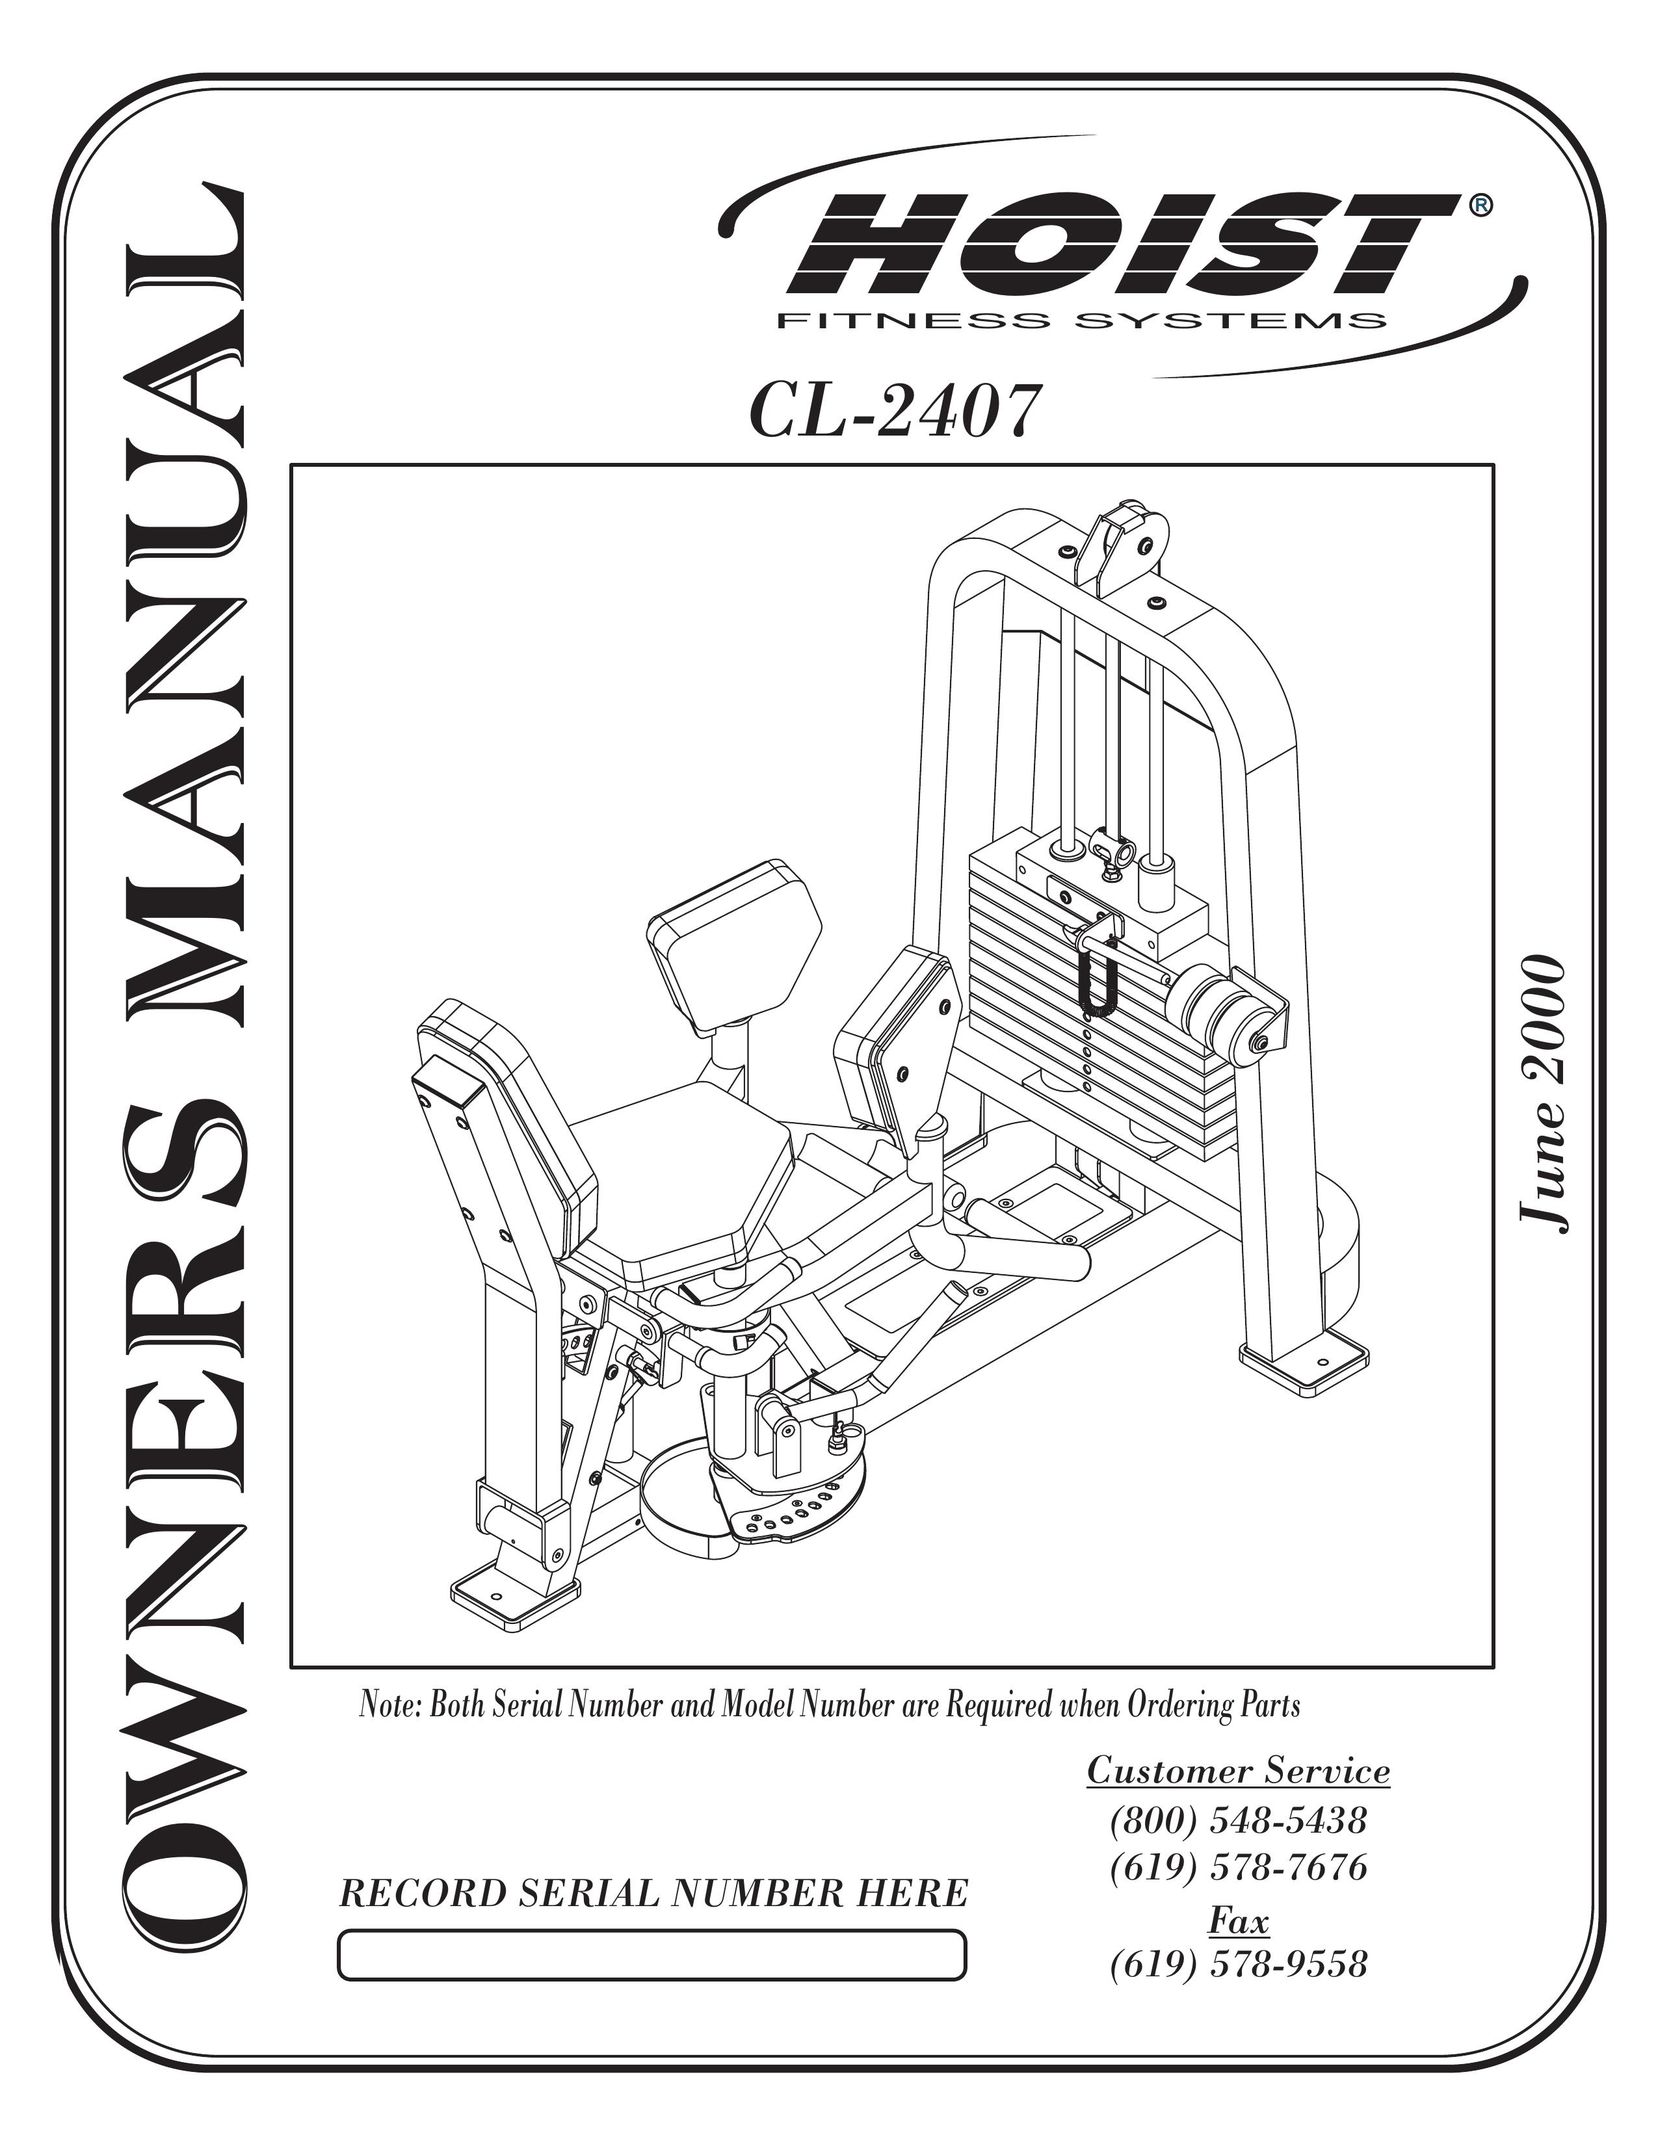 Hoist Fitness CL-2407 Fitness Equipment User Manual (Page 1)